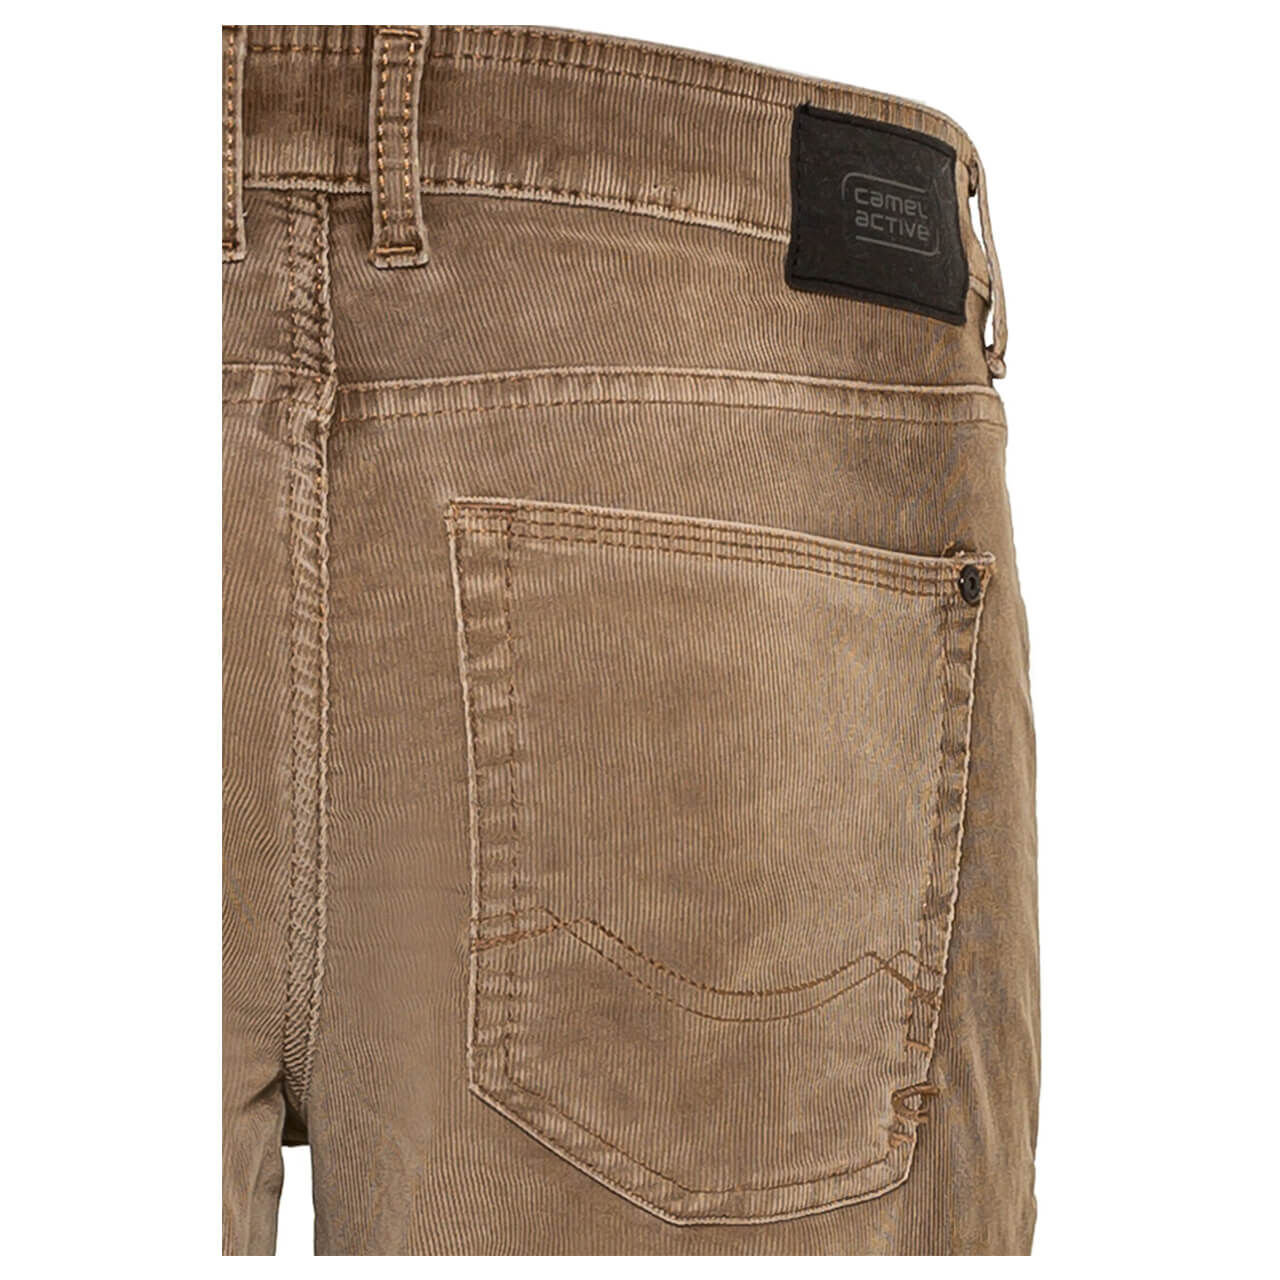 Camel active Madison Cordhose toffee used